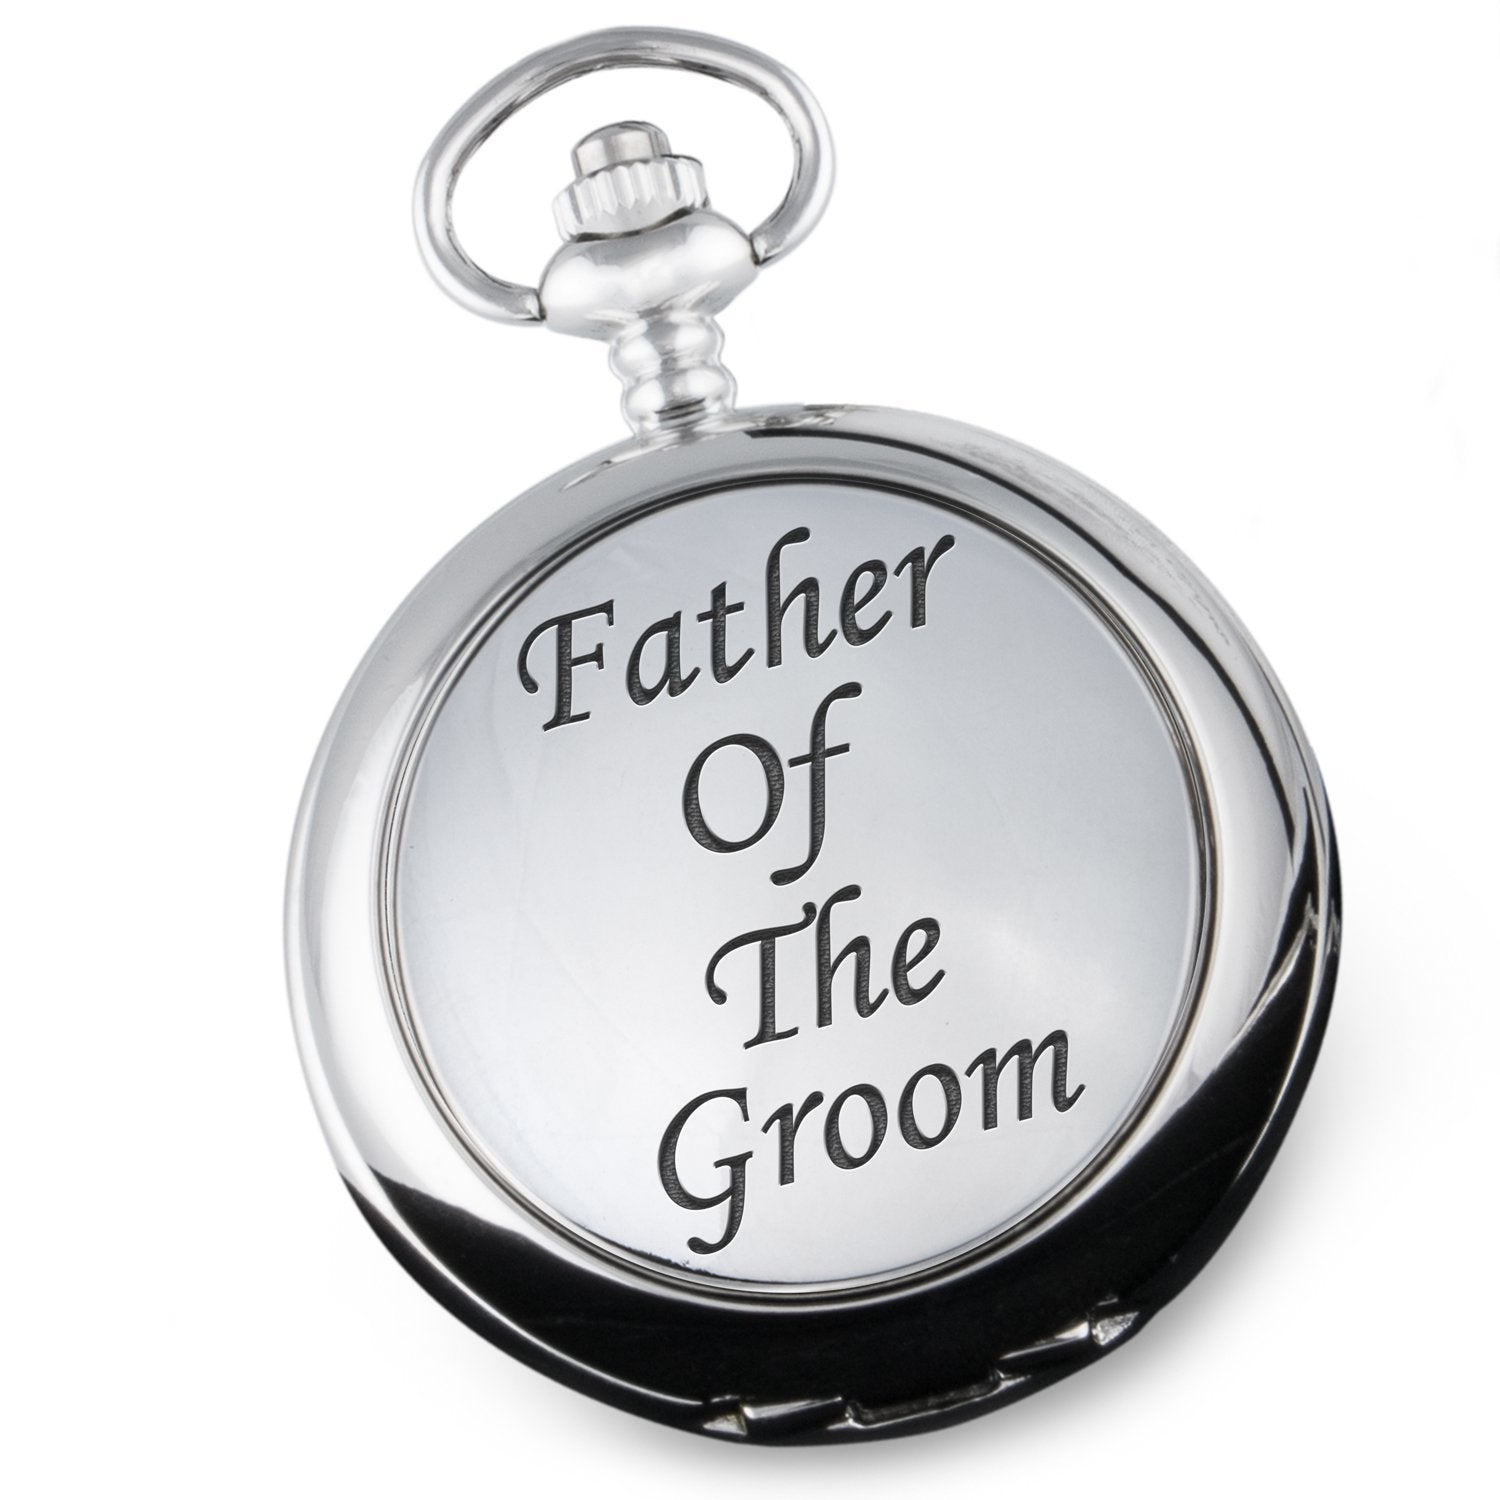 Father of The Groom Pocket Watch Gift Groom’s Dad Wedding Day Gifts